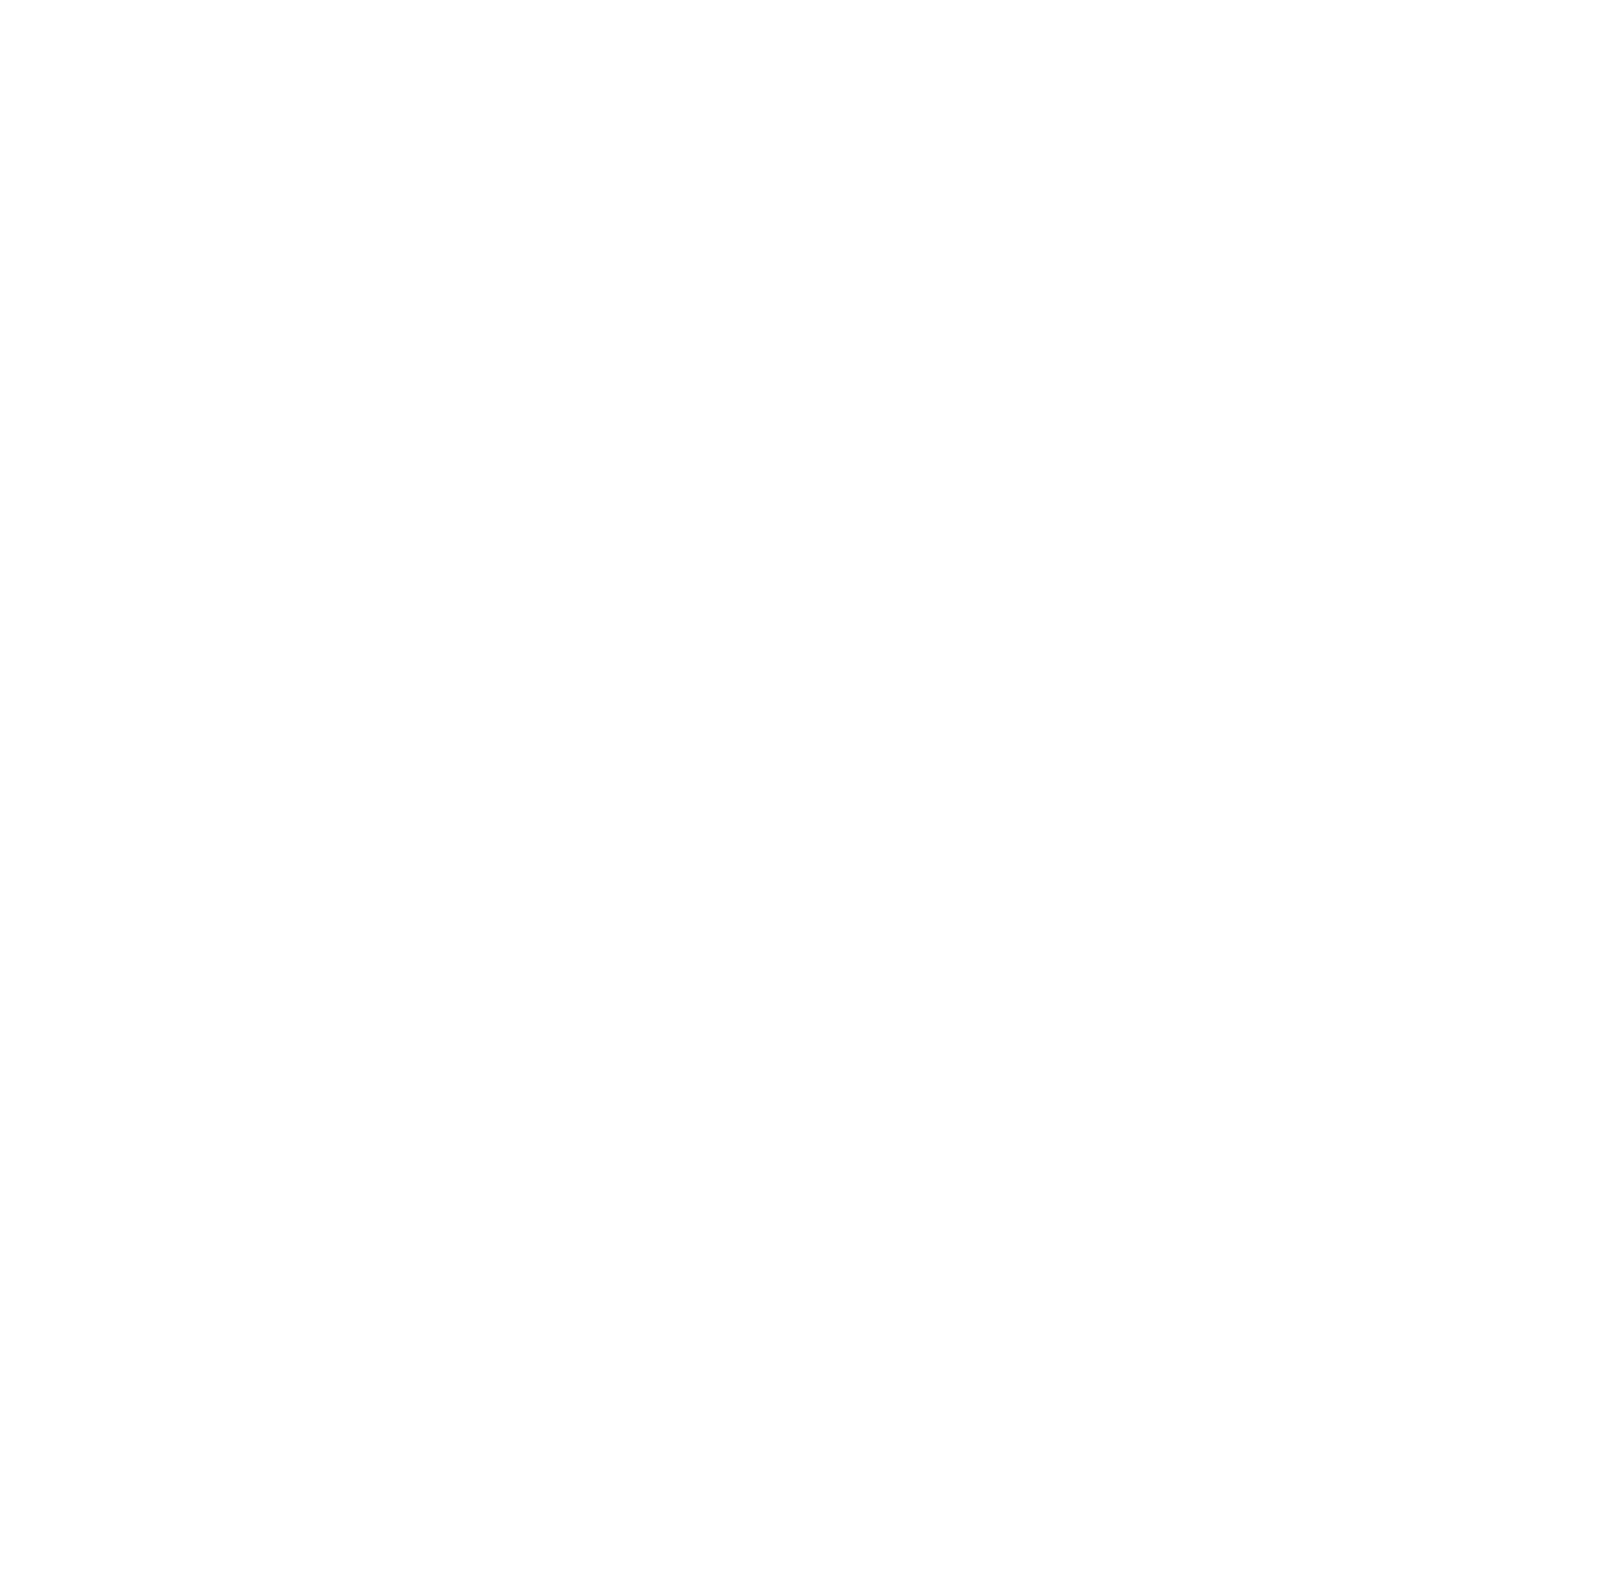 Funny T-Shirts design "I Can't, I Have Plans In The Garage"